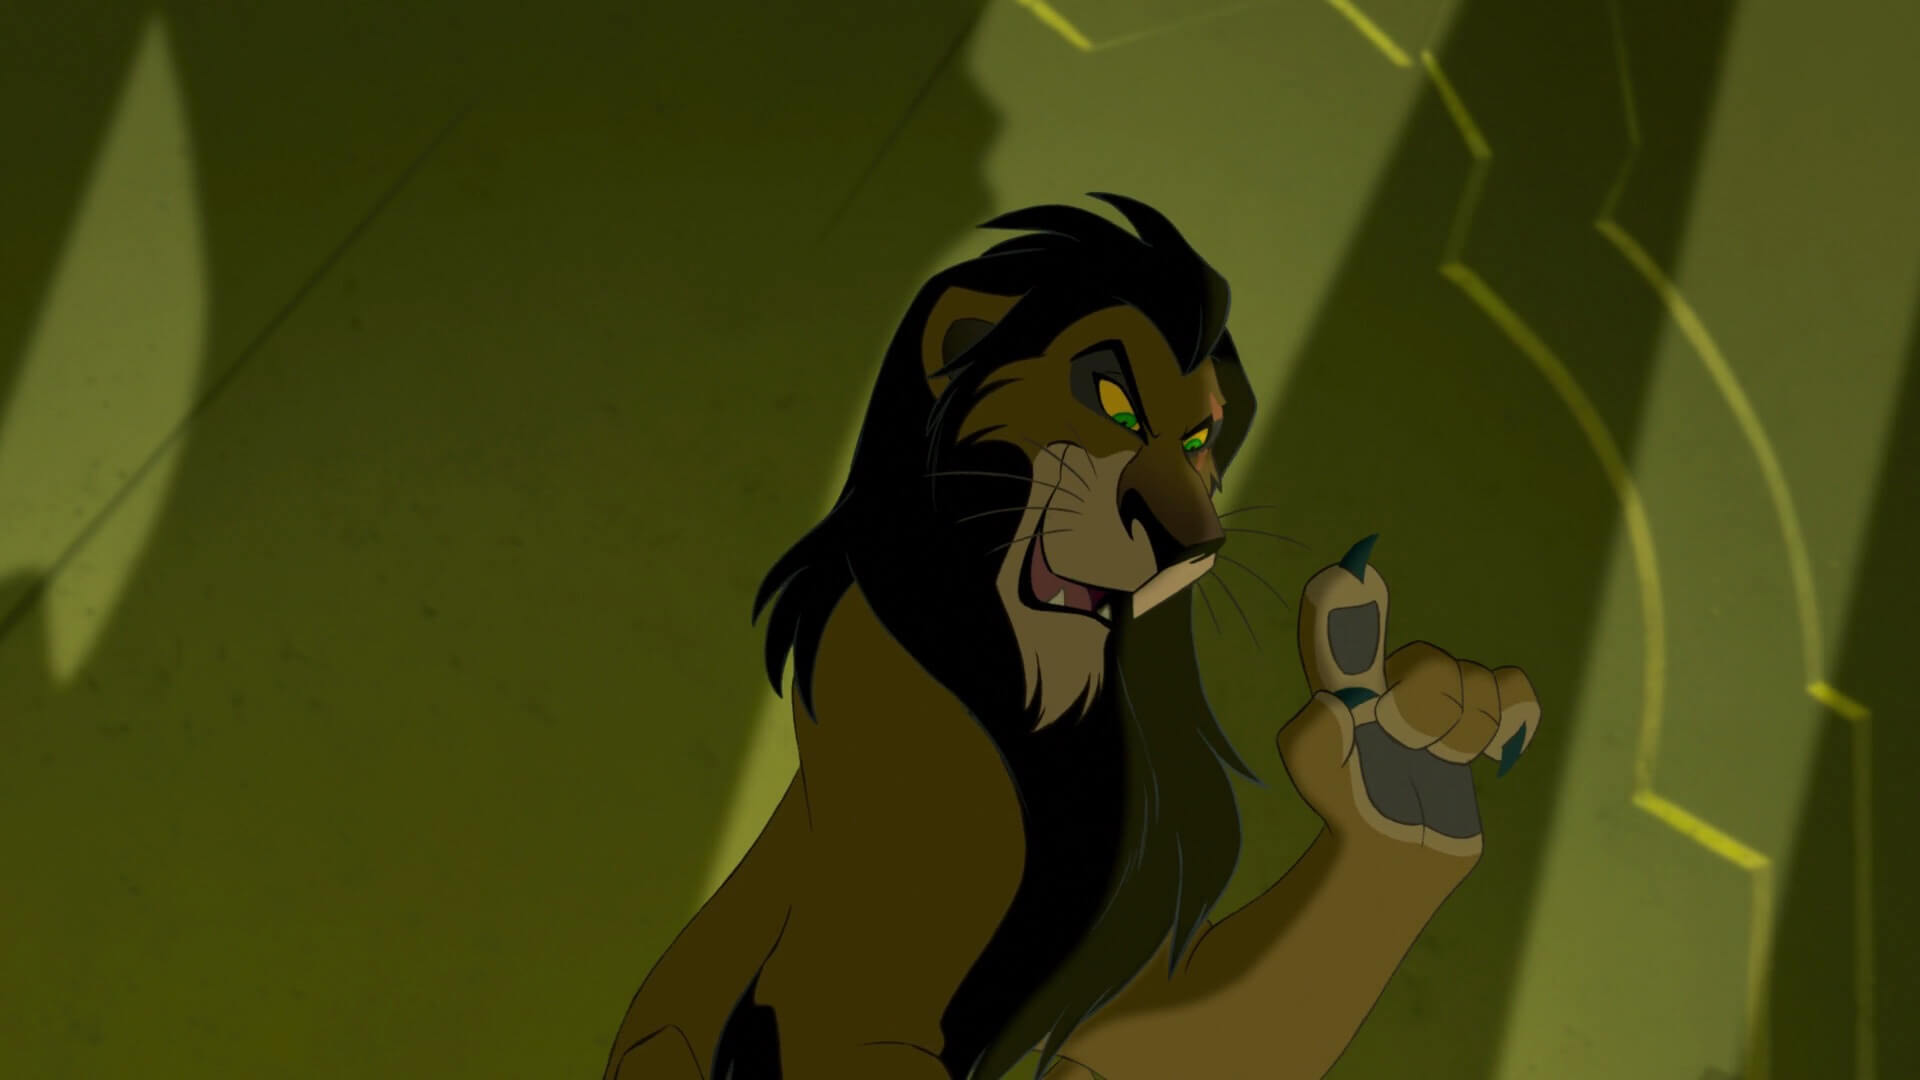 5 actors who could voice Scar in THE LION KING reboot!